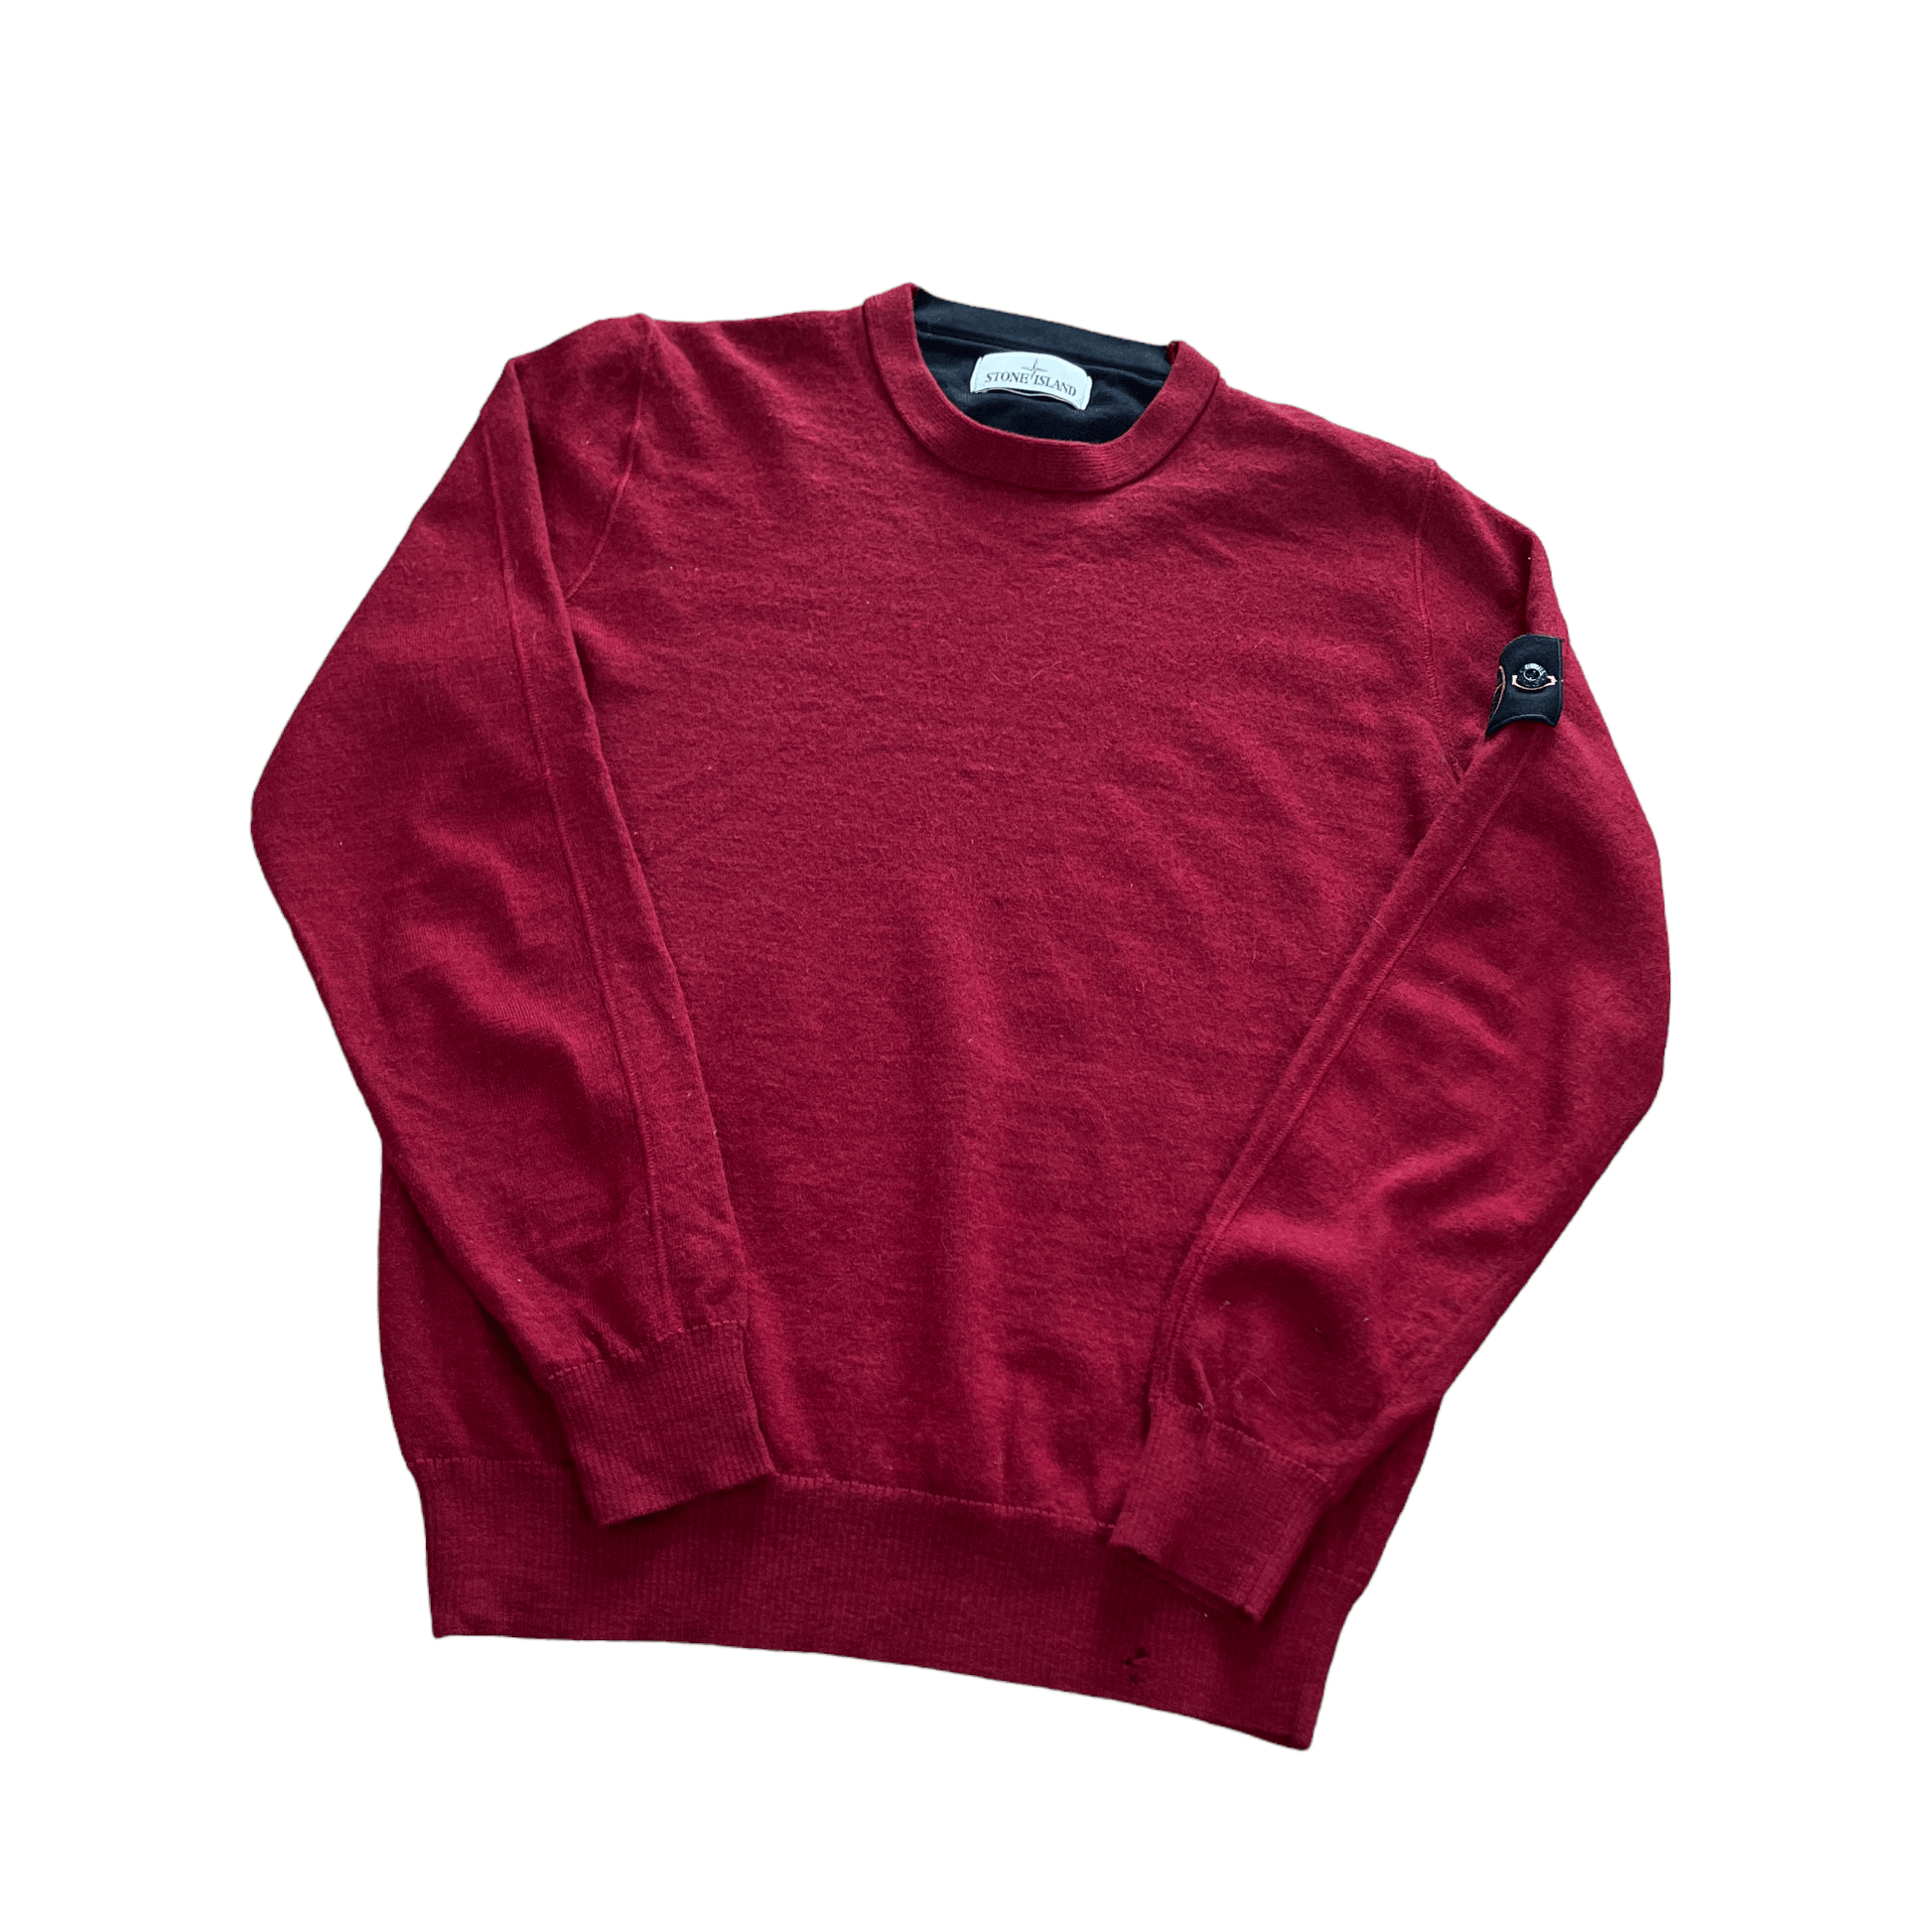 Vintage Red Stone Island Sweatshirt - Recommended Size - Small - The Streetwear Studio